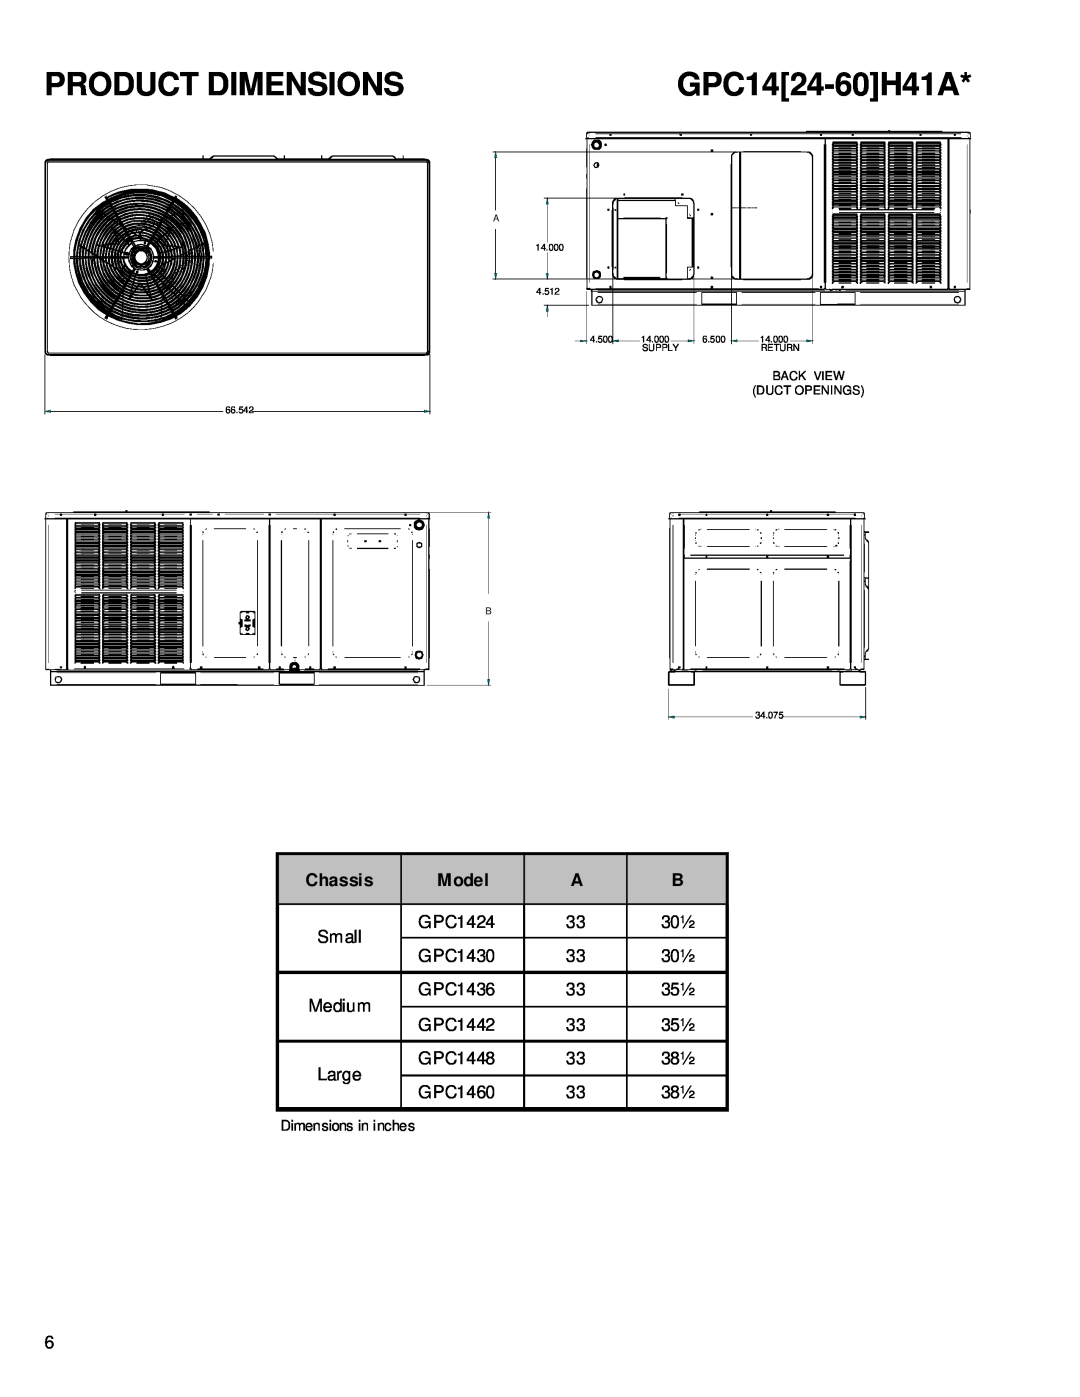 Goodman Mfg RS6300011 service manual Product Dimensions, GPC1424-60H41A, Chassis, Model 